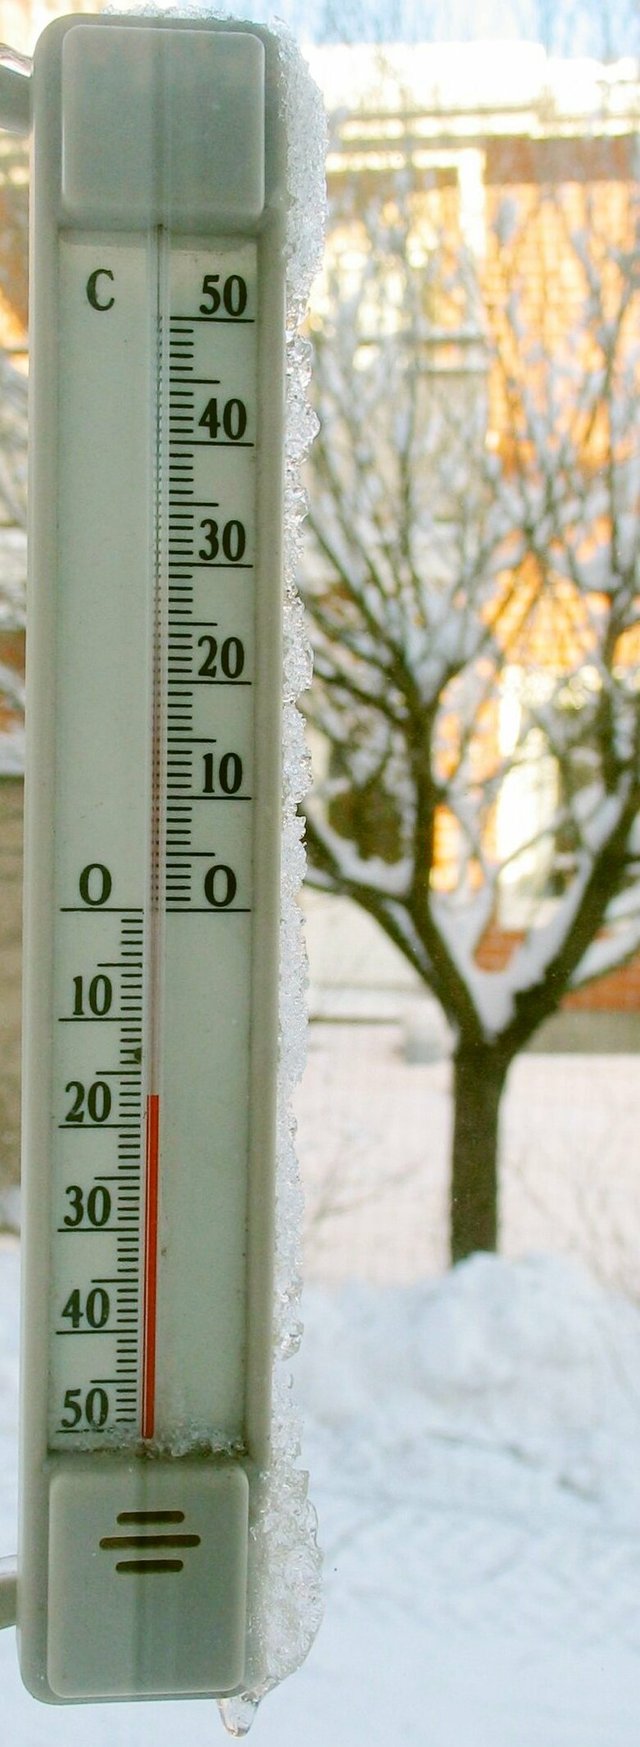 A typical Celsius thermometer measures a winter day temperature of −17 °C